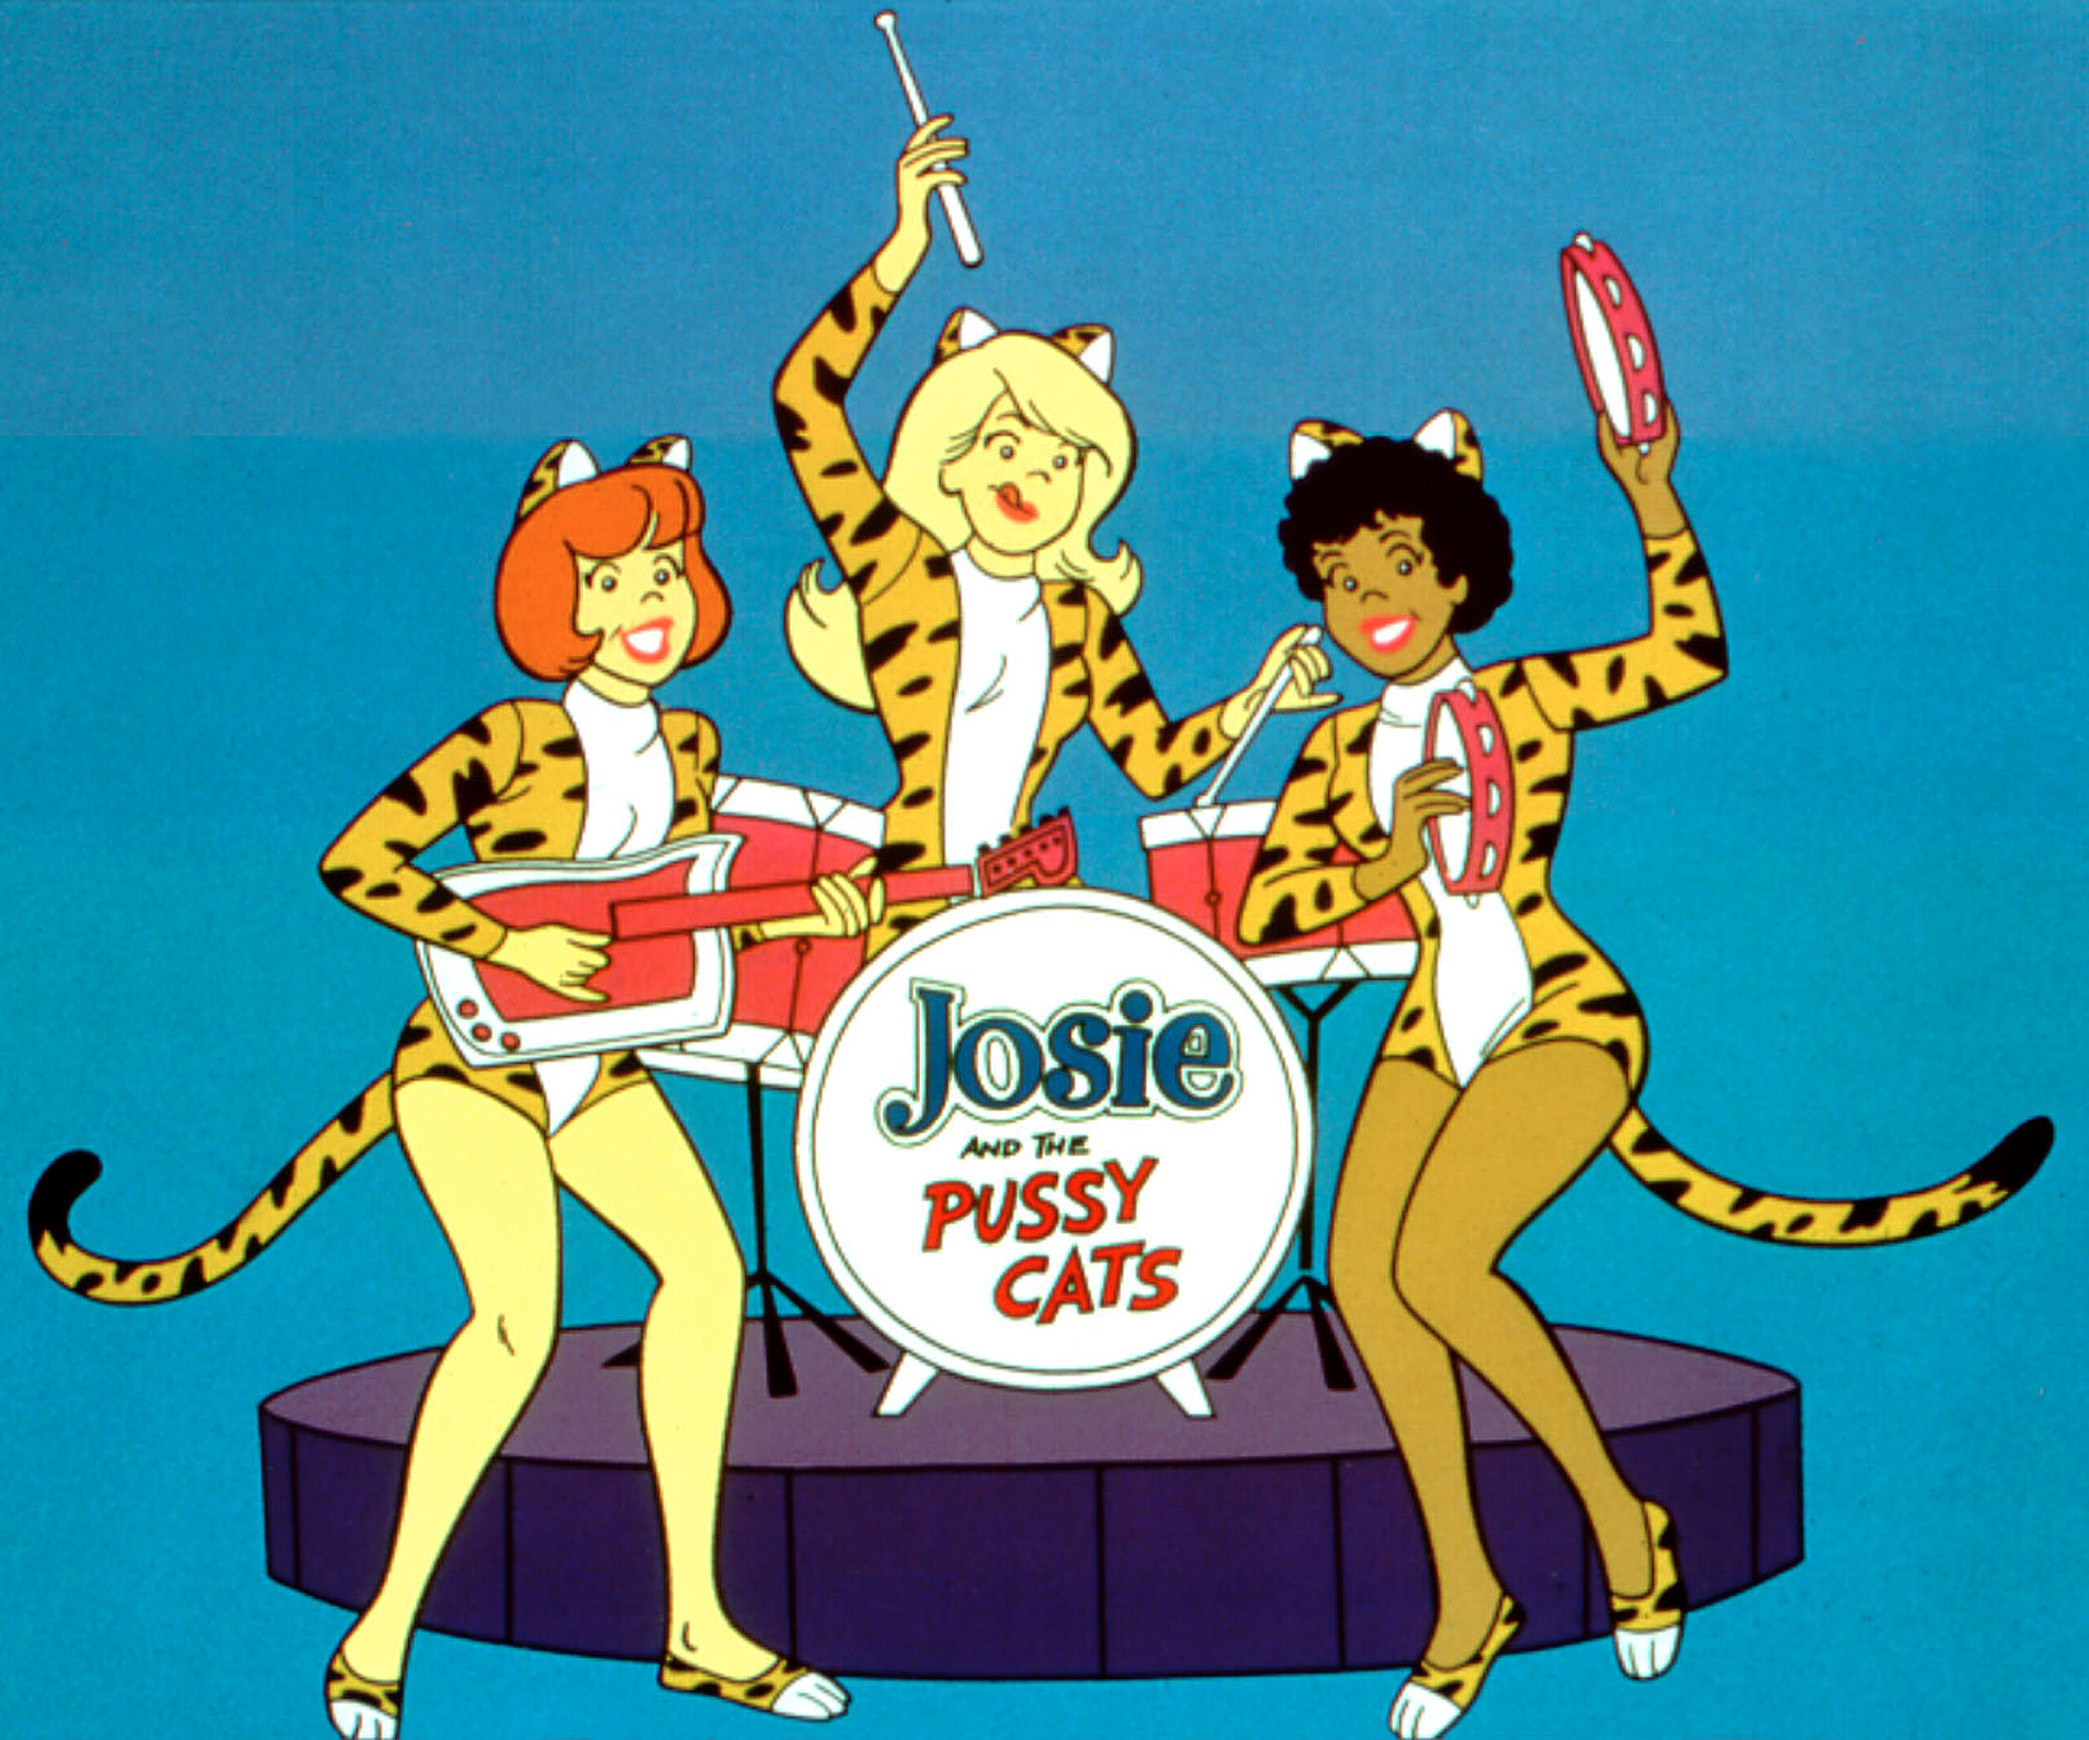 Animated version of Josie and the Pussycats in the &#x27;70s